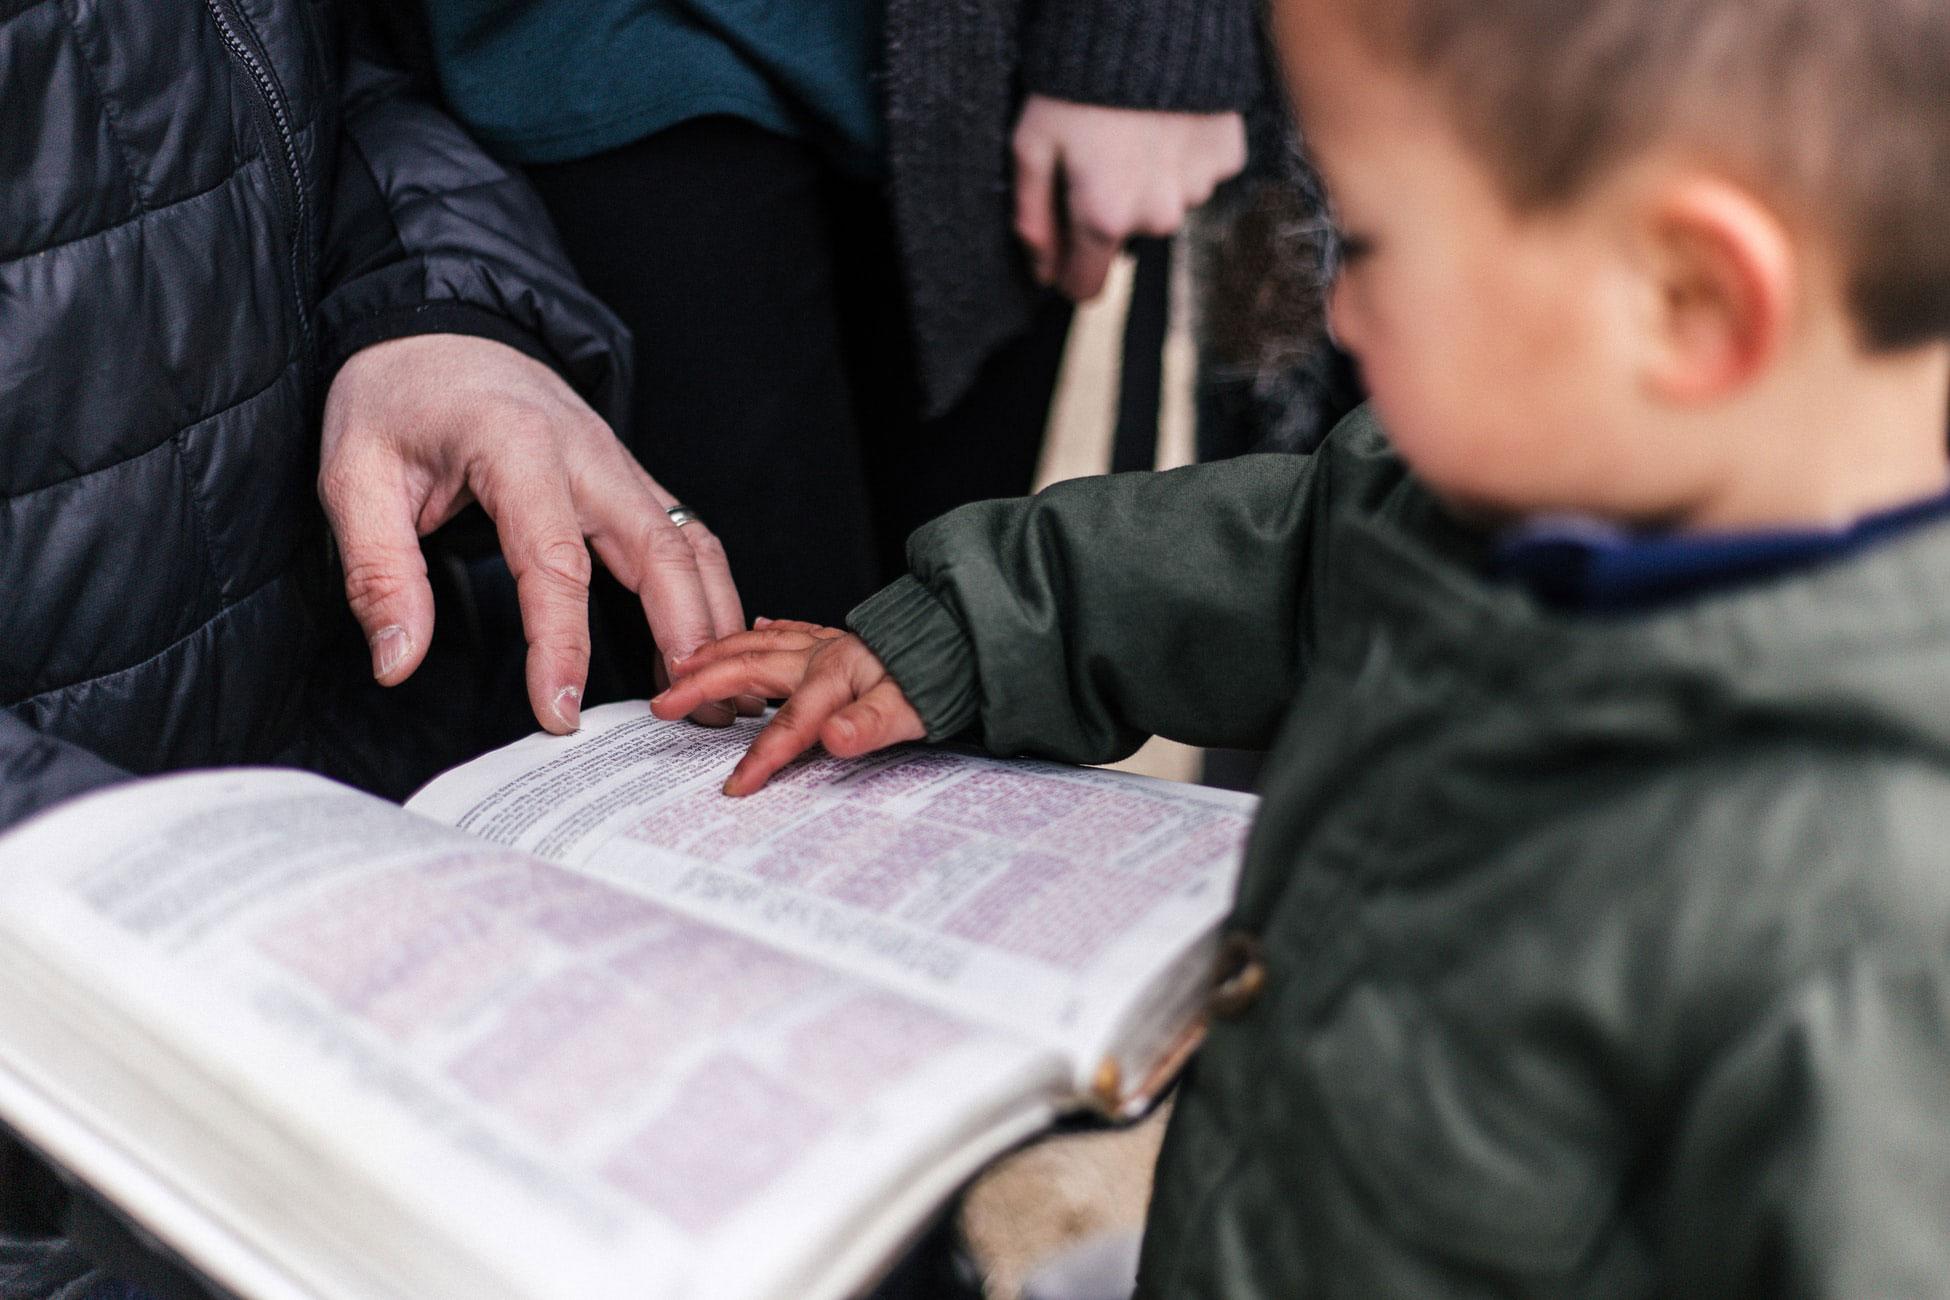 A toddler points at passages in a Bible held by an adult.